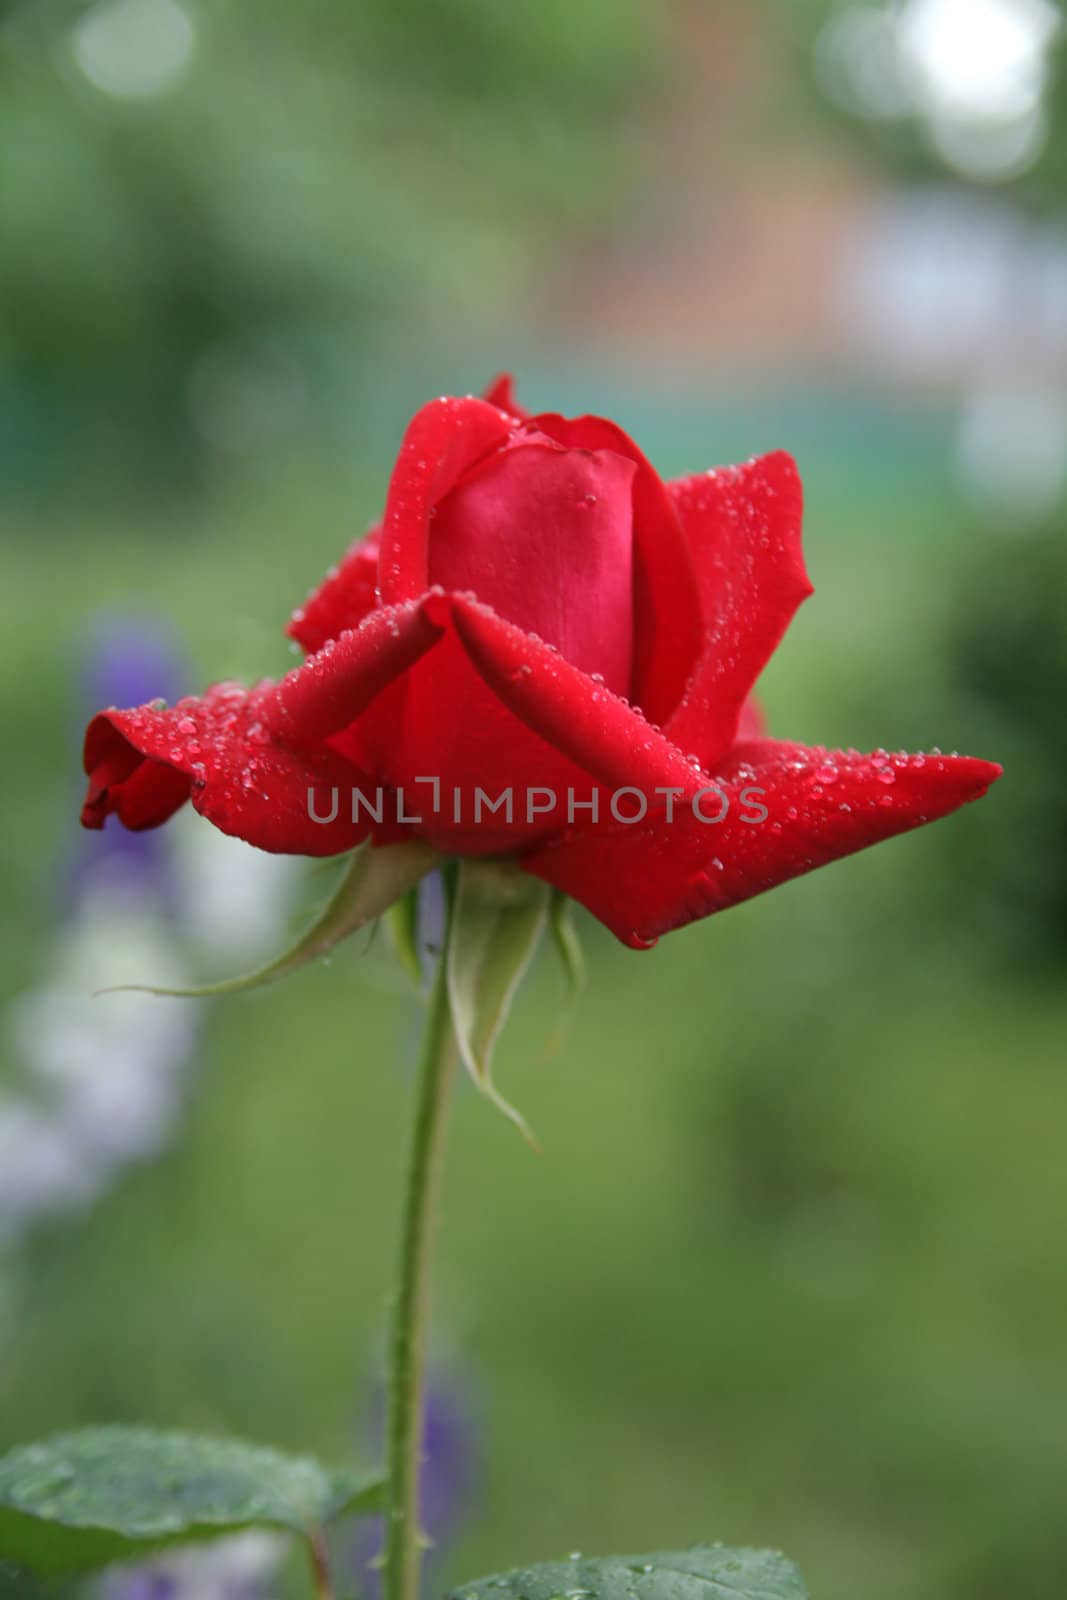 Red rose on a green background with dewdrops